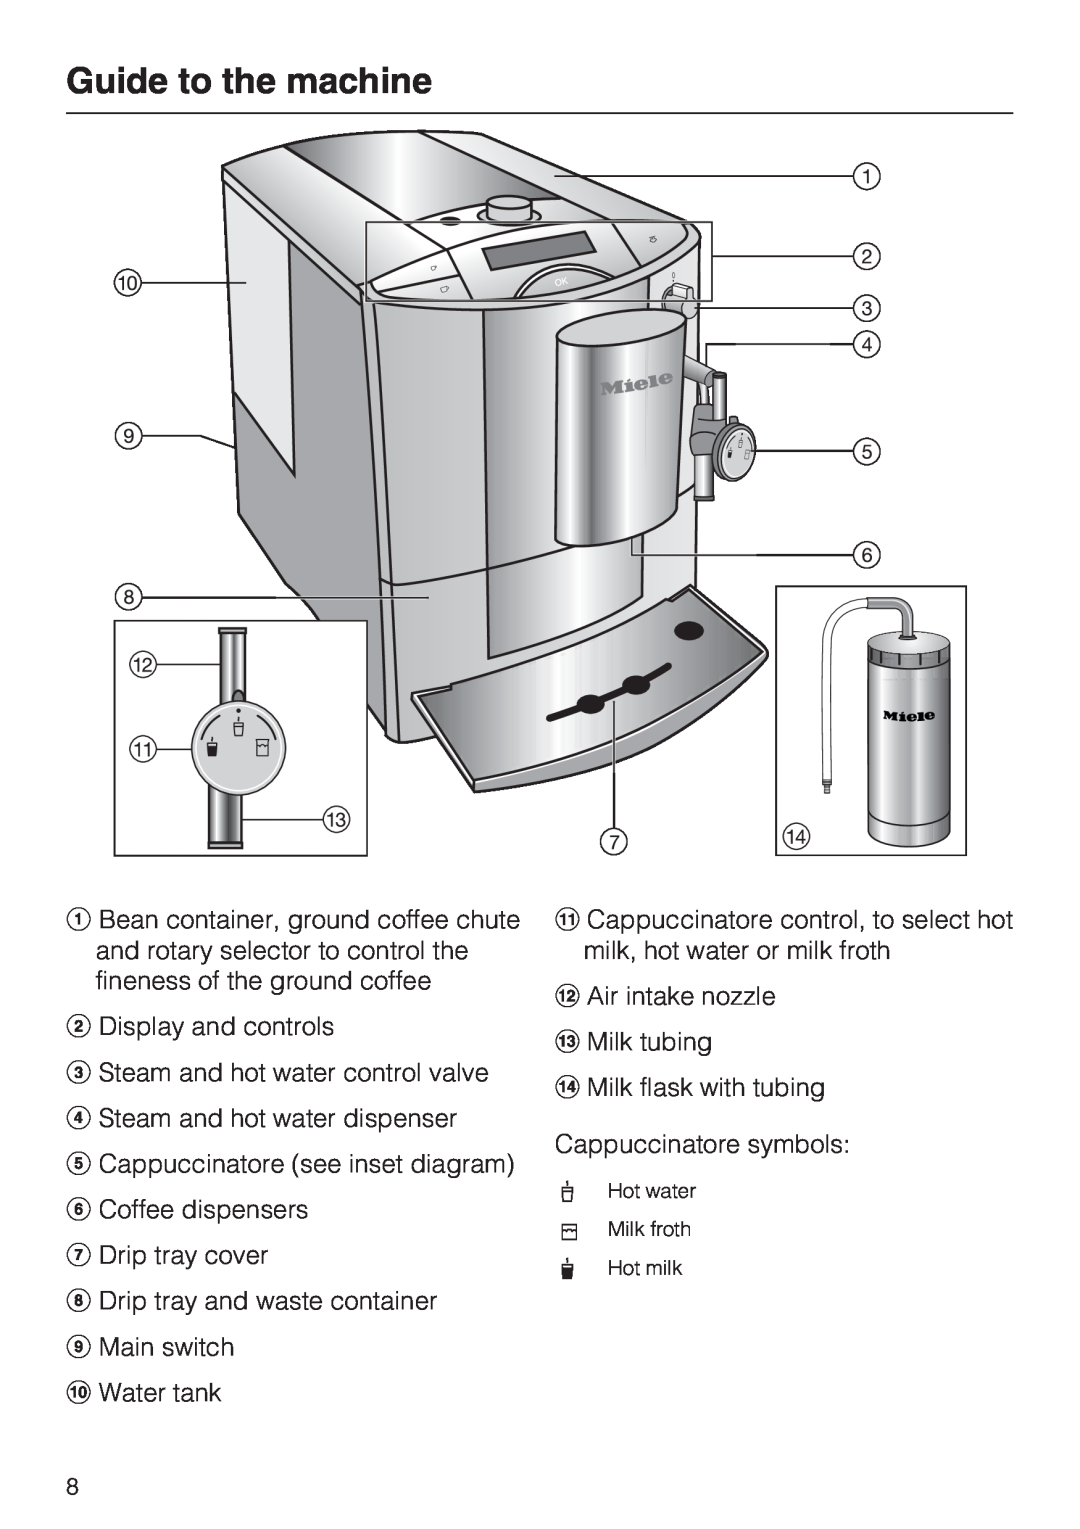 Miele CM 5000 operating instructions Guide to the machine 